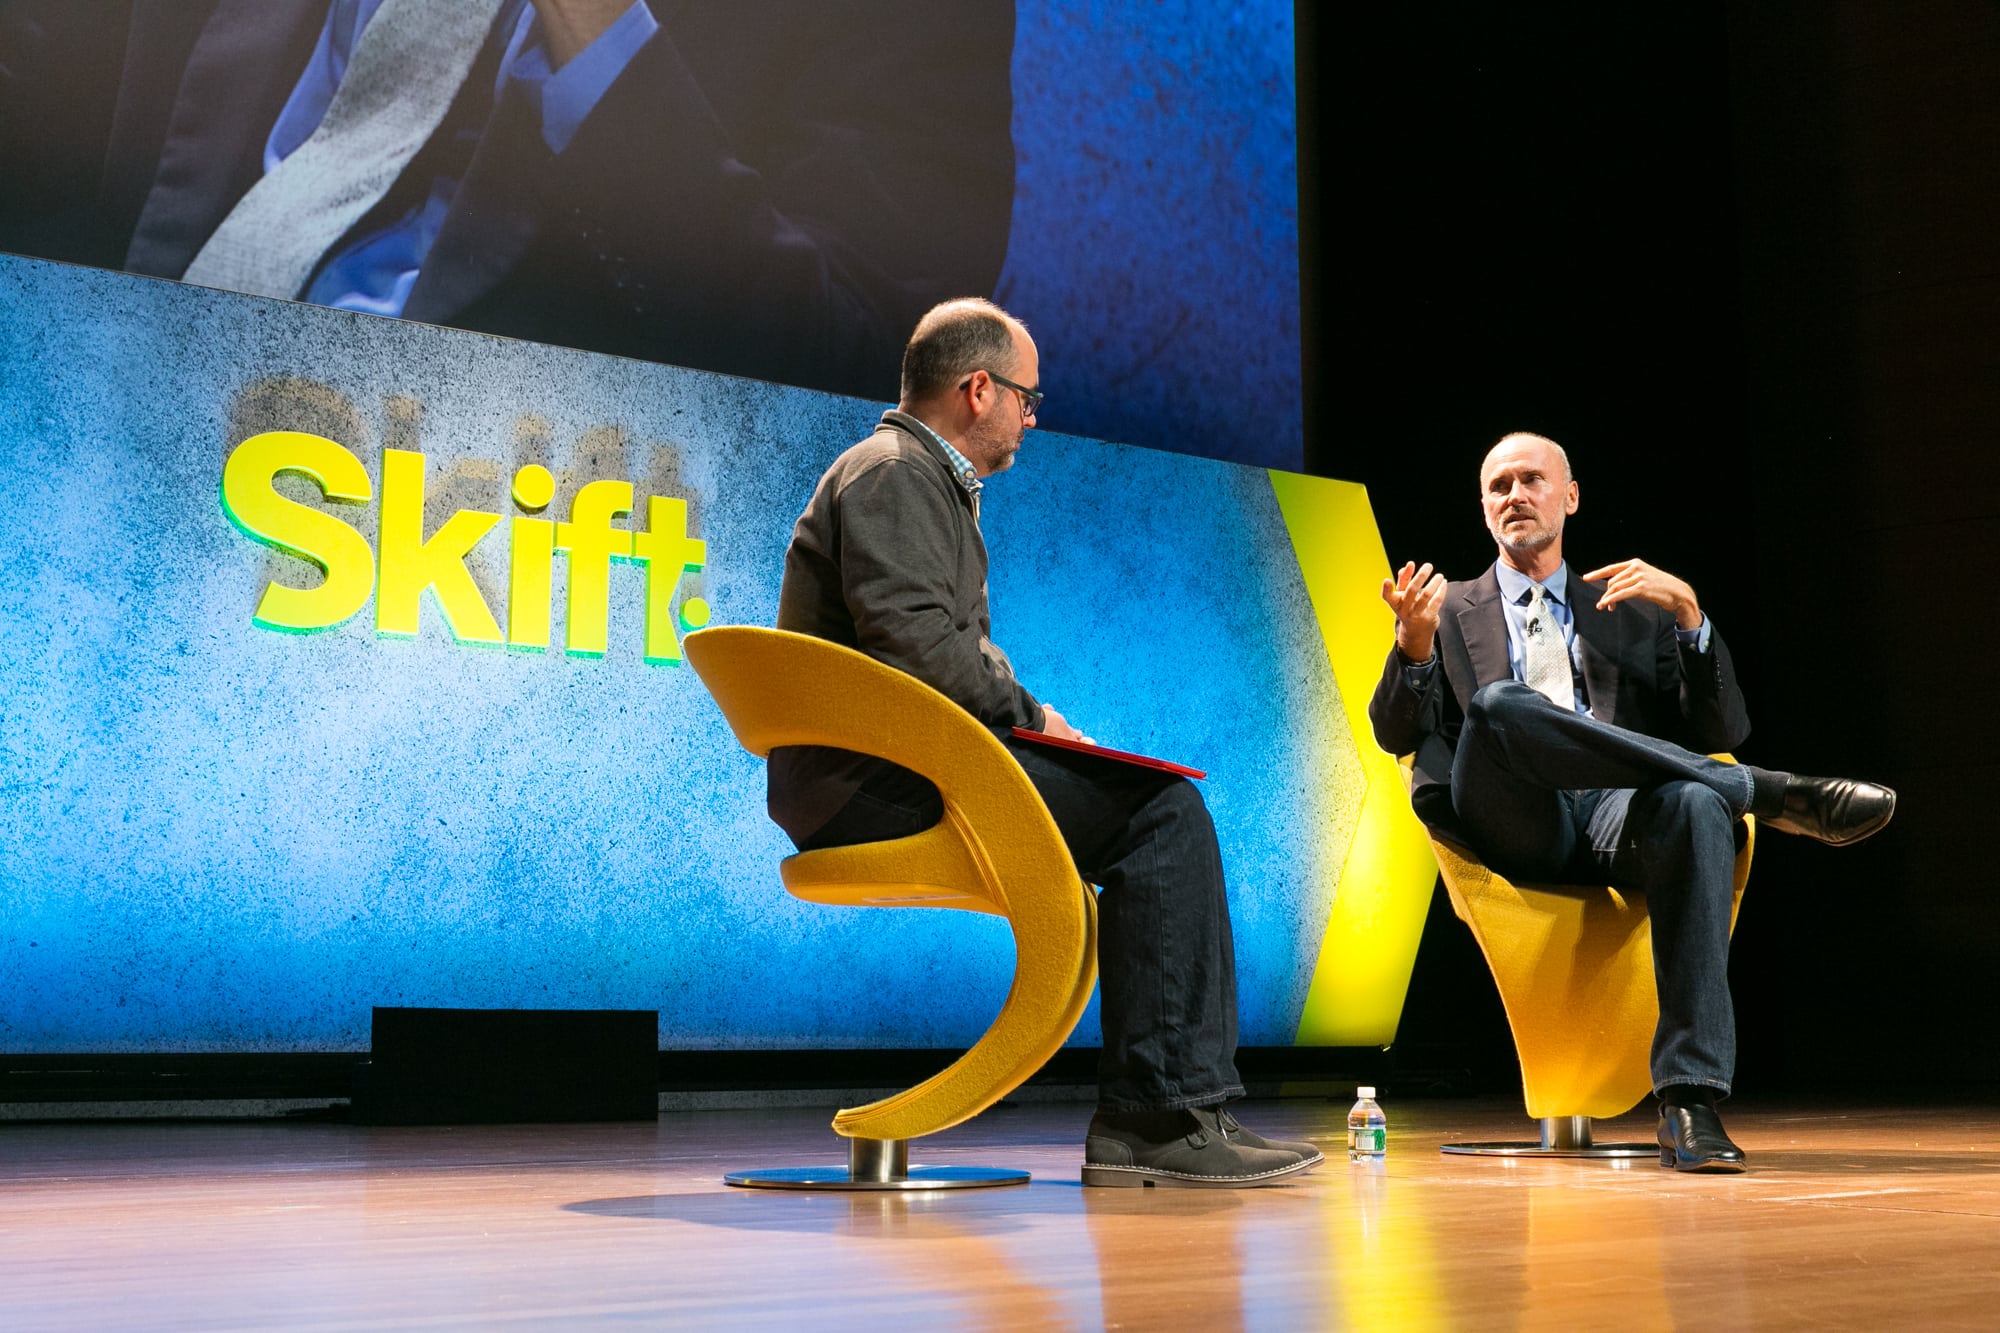 Skift co-founder Jason Clampet interviewed Chip Conley, Airbnb head of global hospitality, at Skift Global Forum 2016.